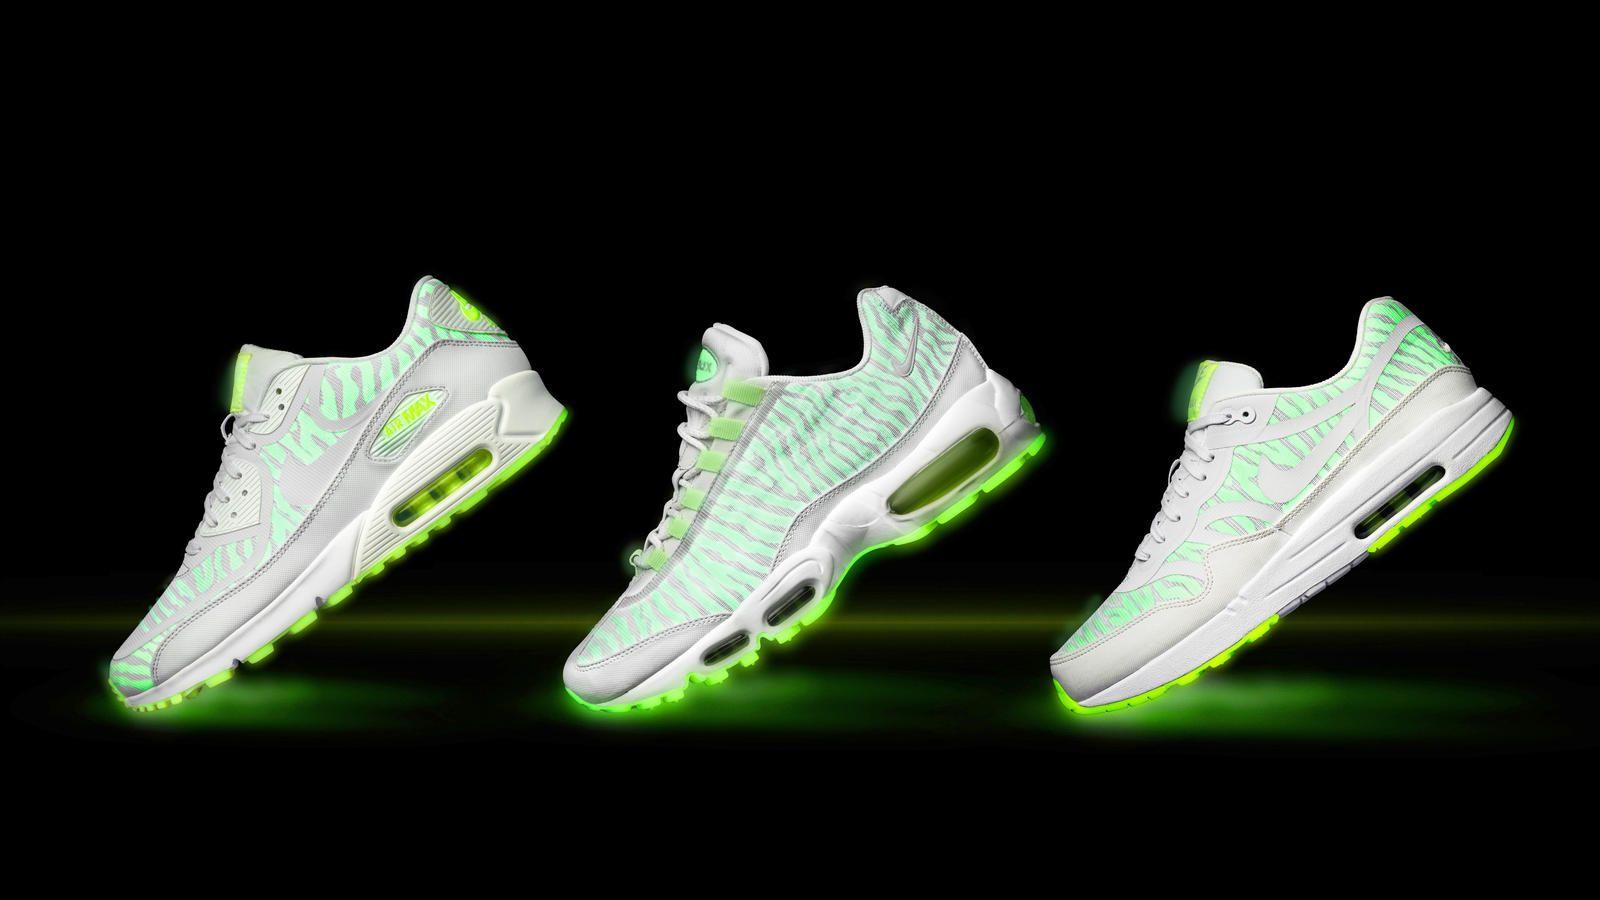 Glow in the Dark Nike Logo - Visible Air Just Got More Visible: The Nike Air Max Glow Collection